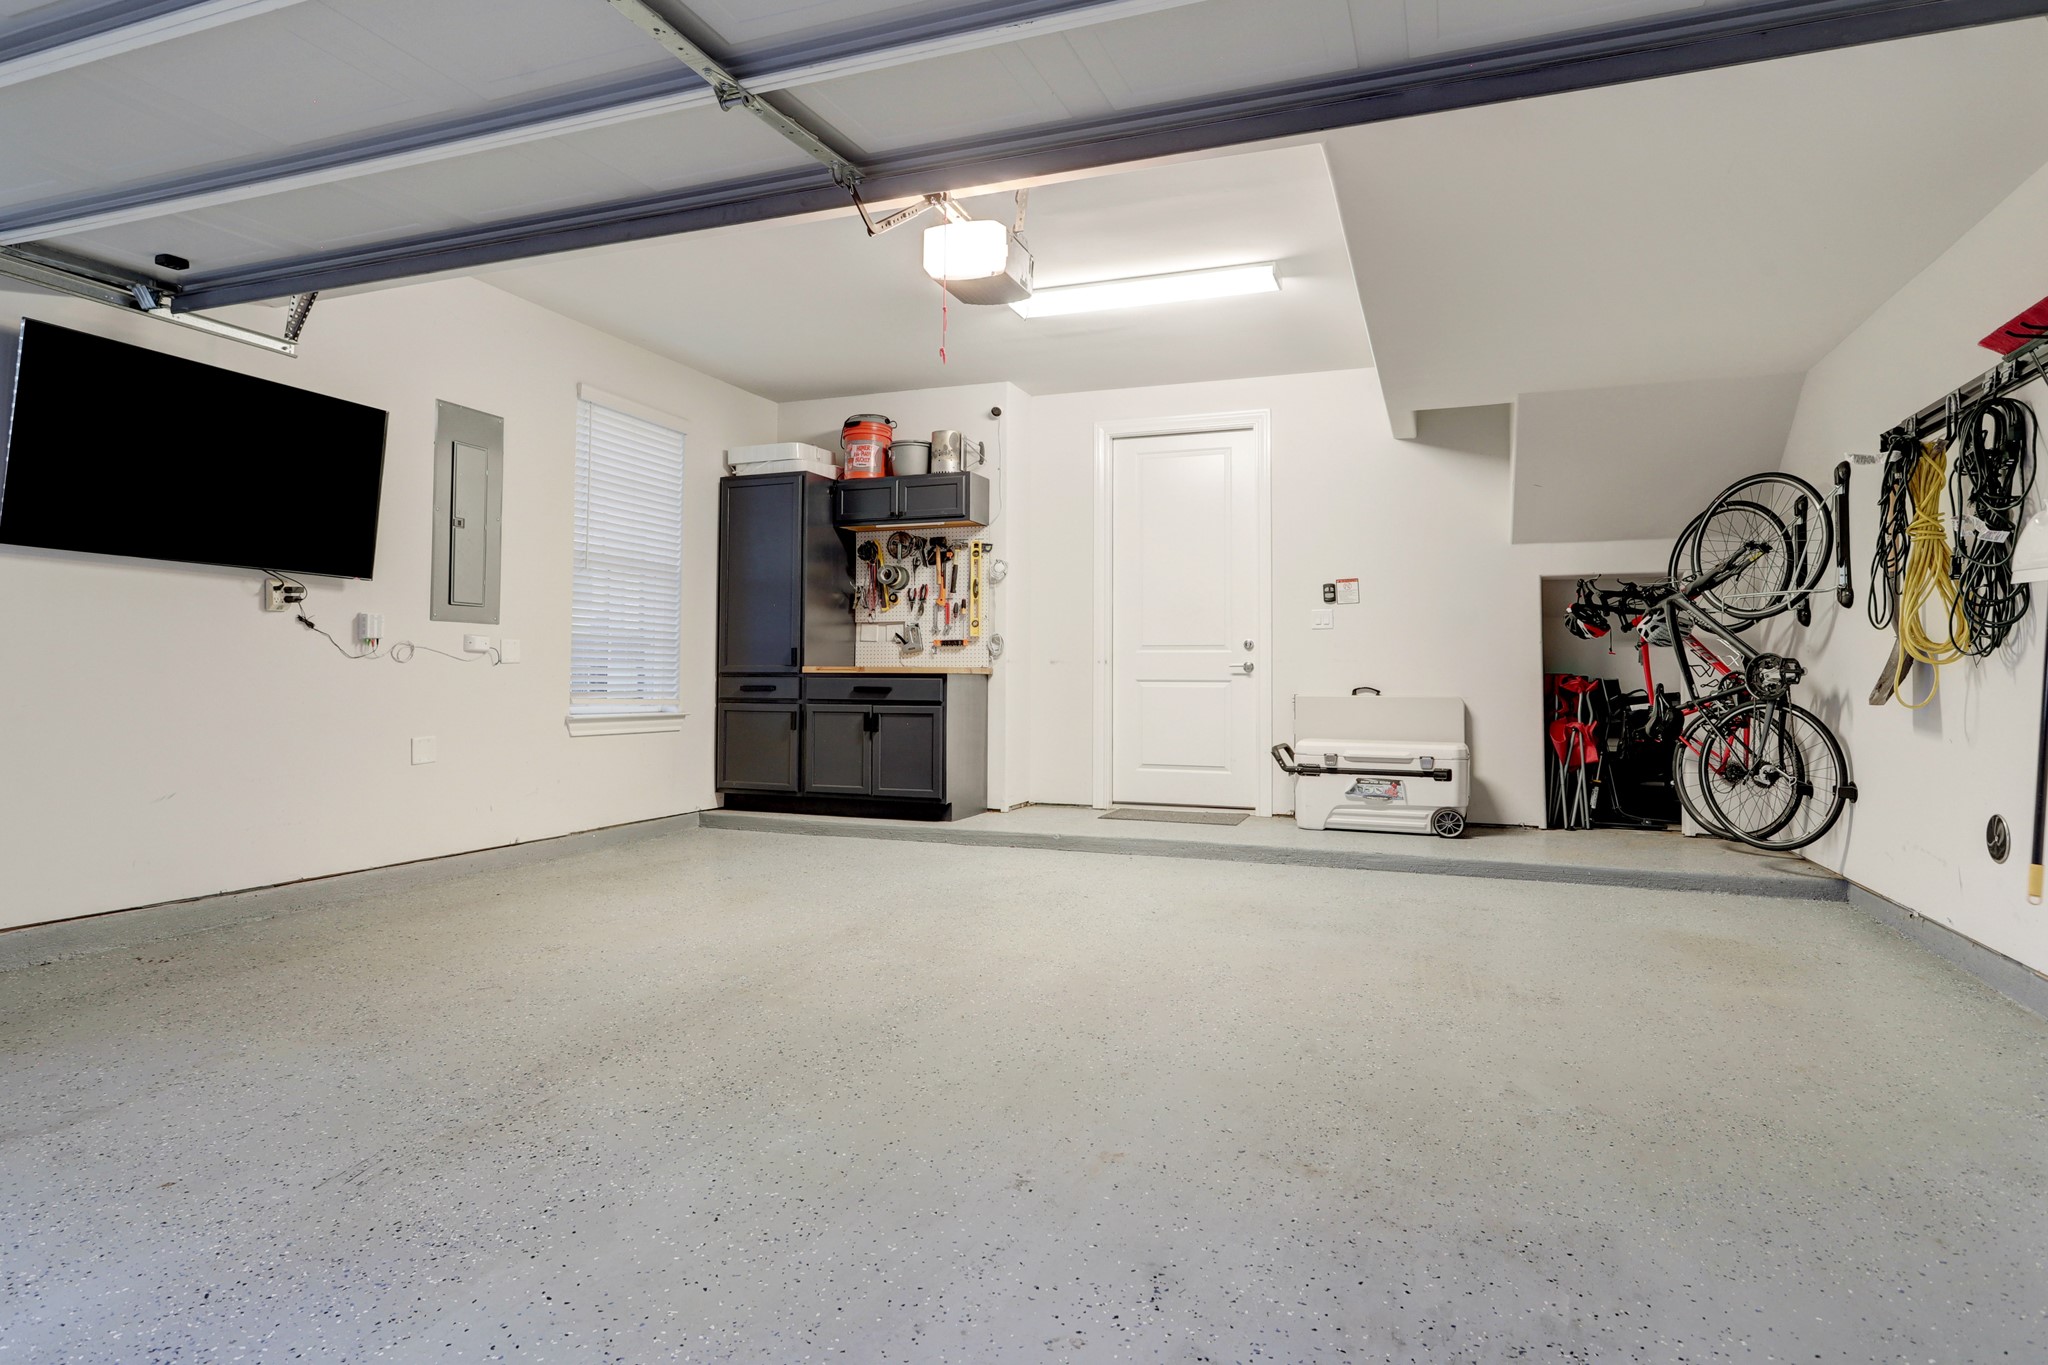 The details are everywhere! Even the garage... with epoxy coated floors, built-in cabinets and an storage nook.